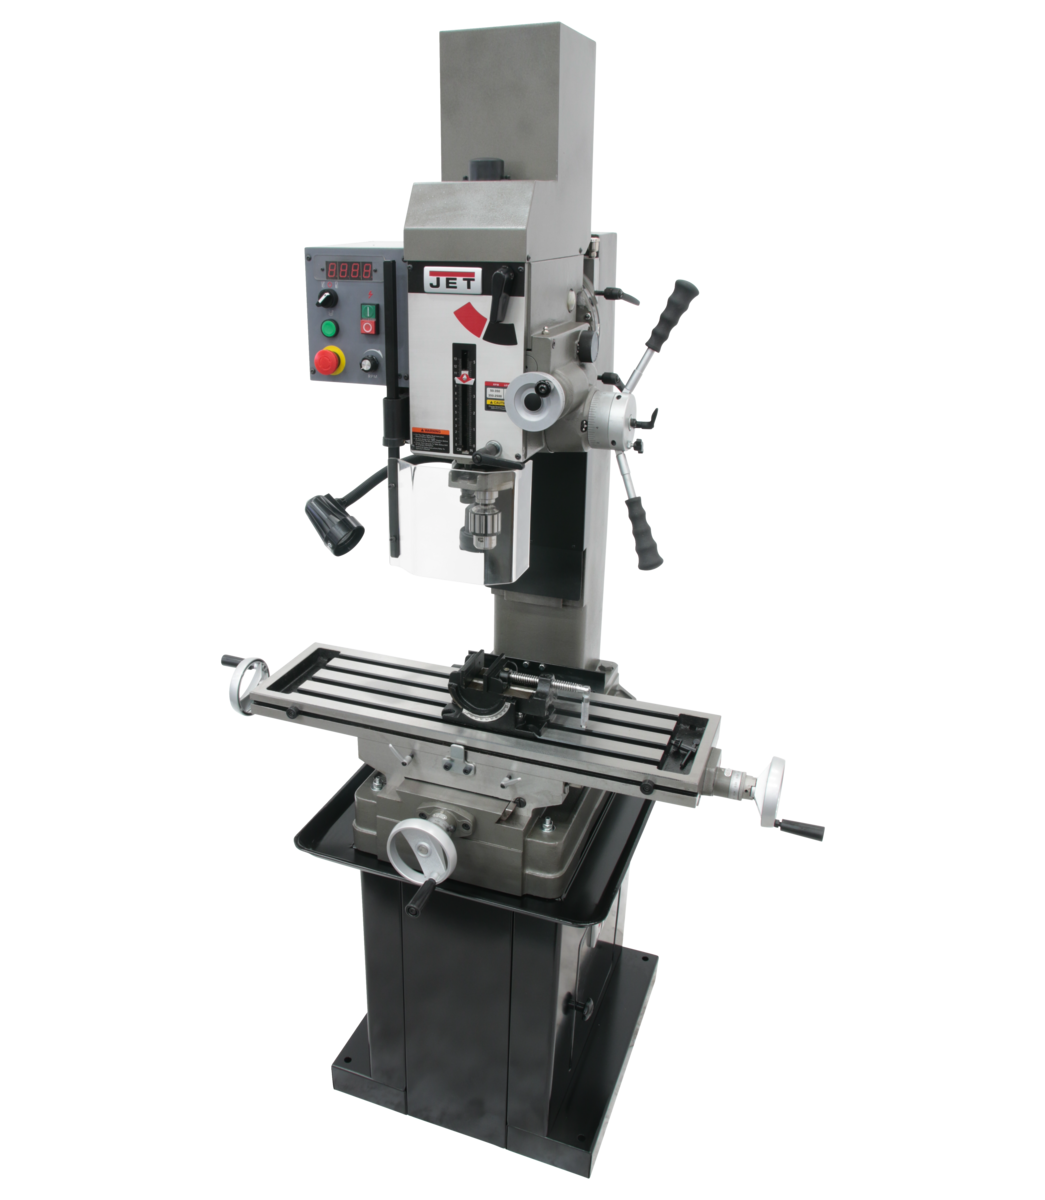 351156. JMD-45VSPFT, Variable Speed Geared Head Square Column Mill Drill with Power Downfeed & Newall DP700 2-Axis DRO